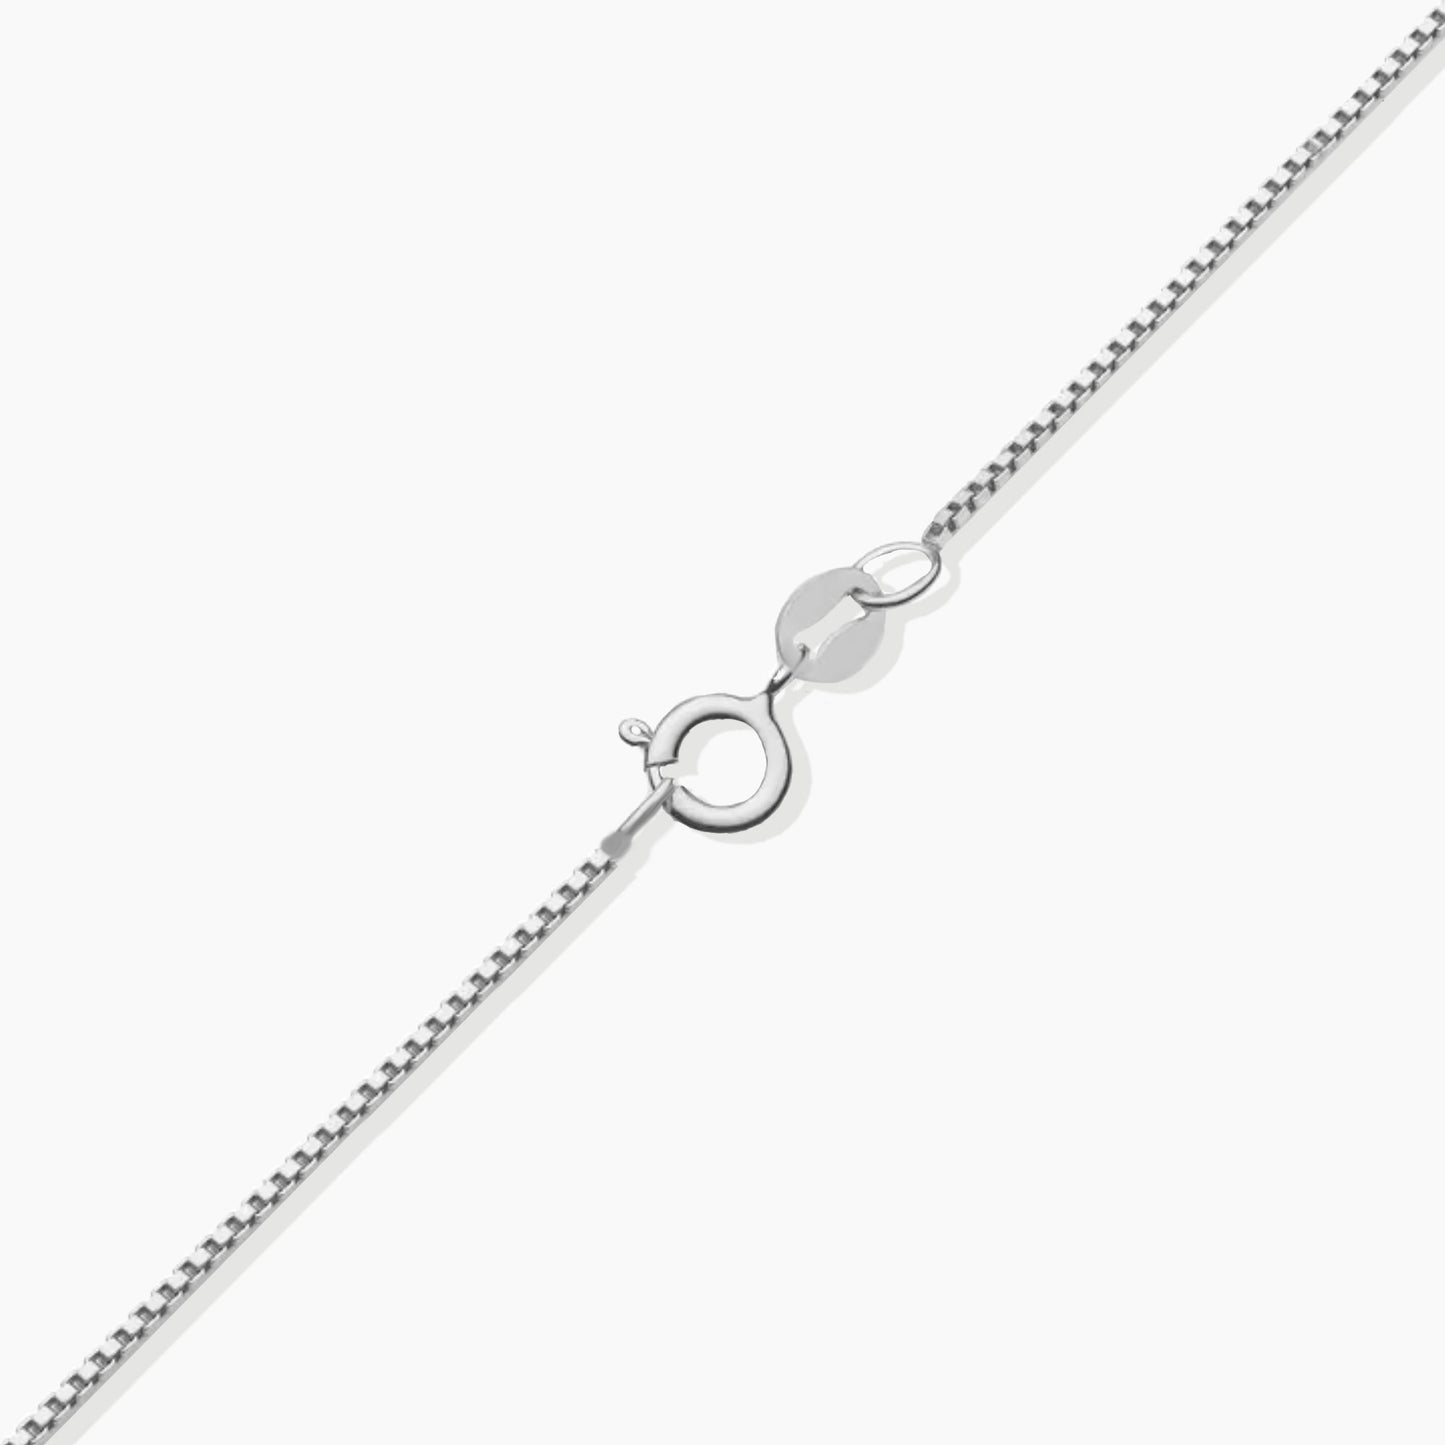 Irosk Round Cut Necklace in Sterling Silver -  Emerald